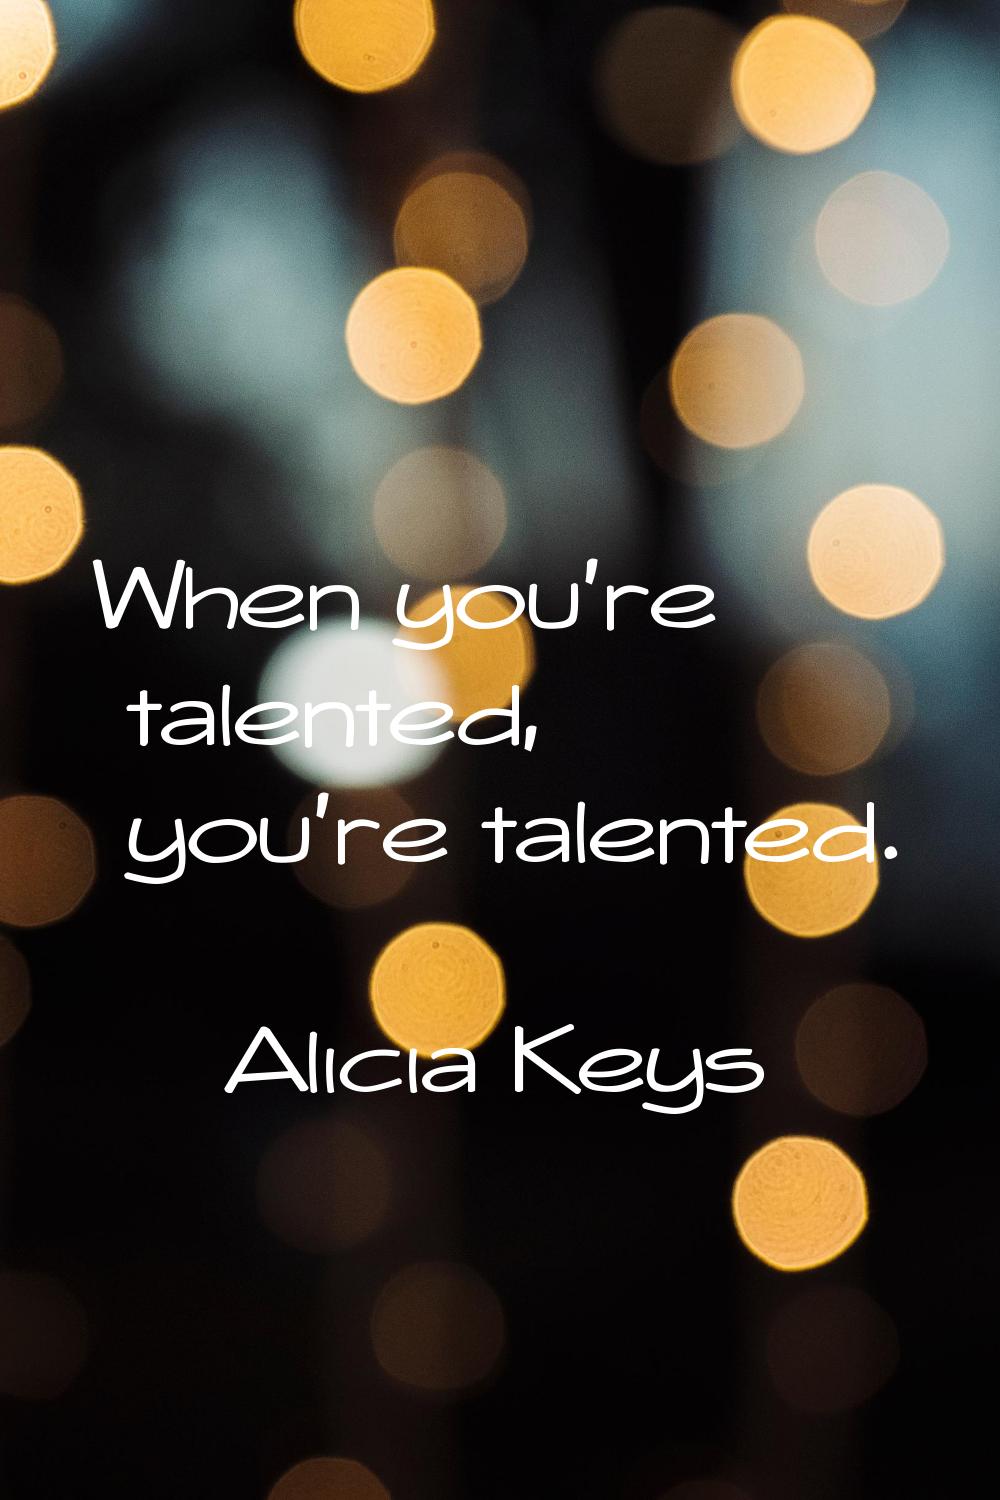 When you're talented, you're talented.